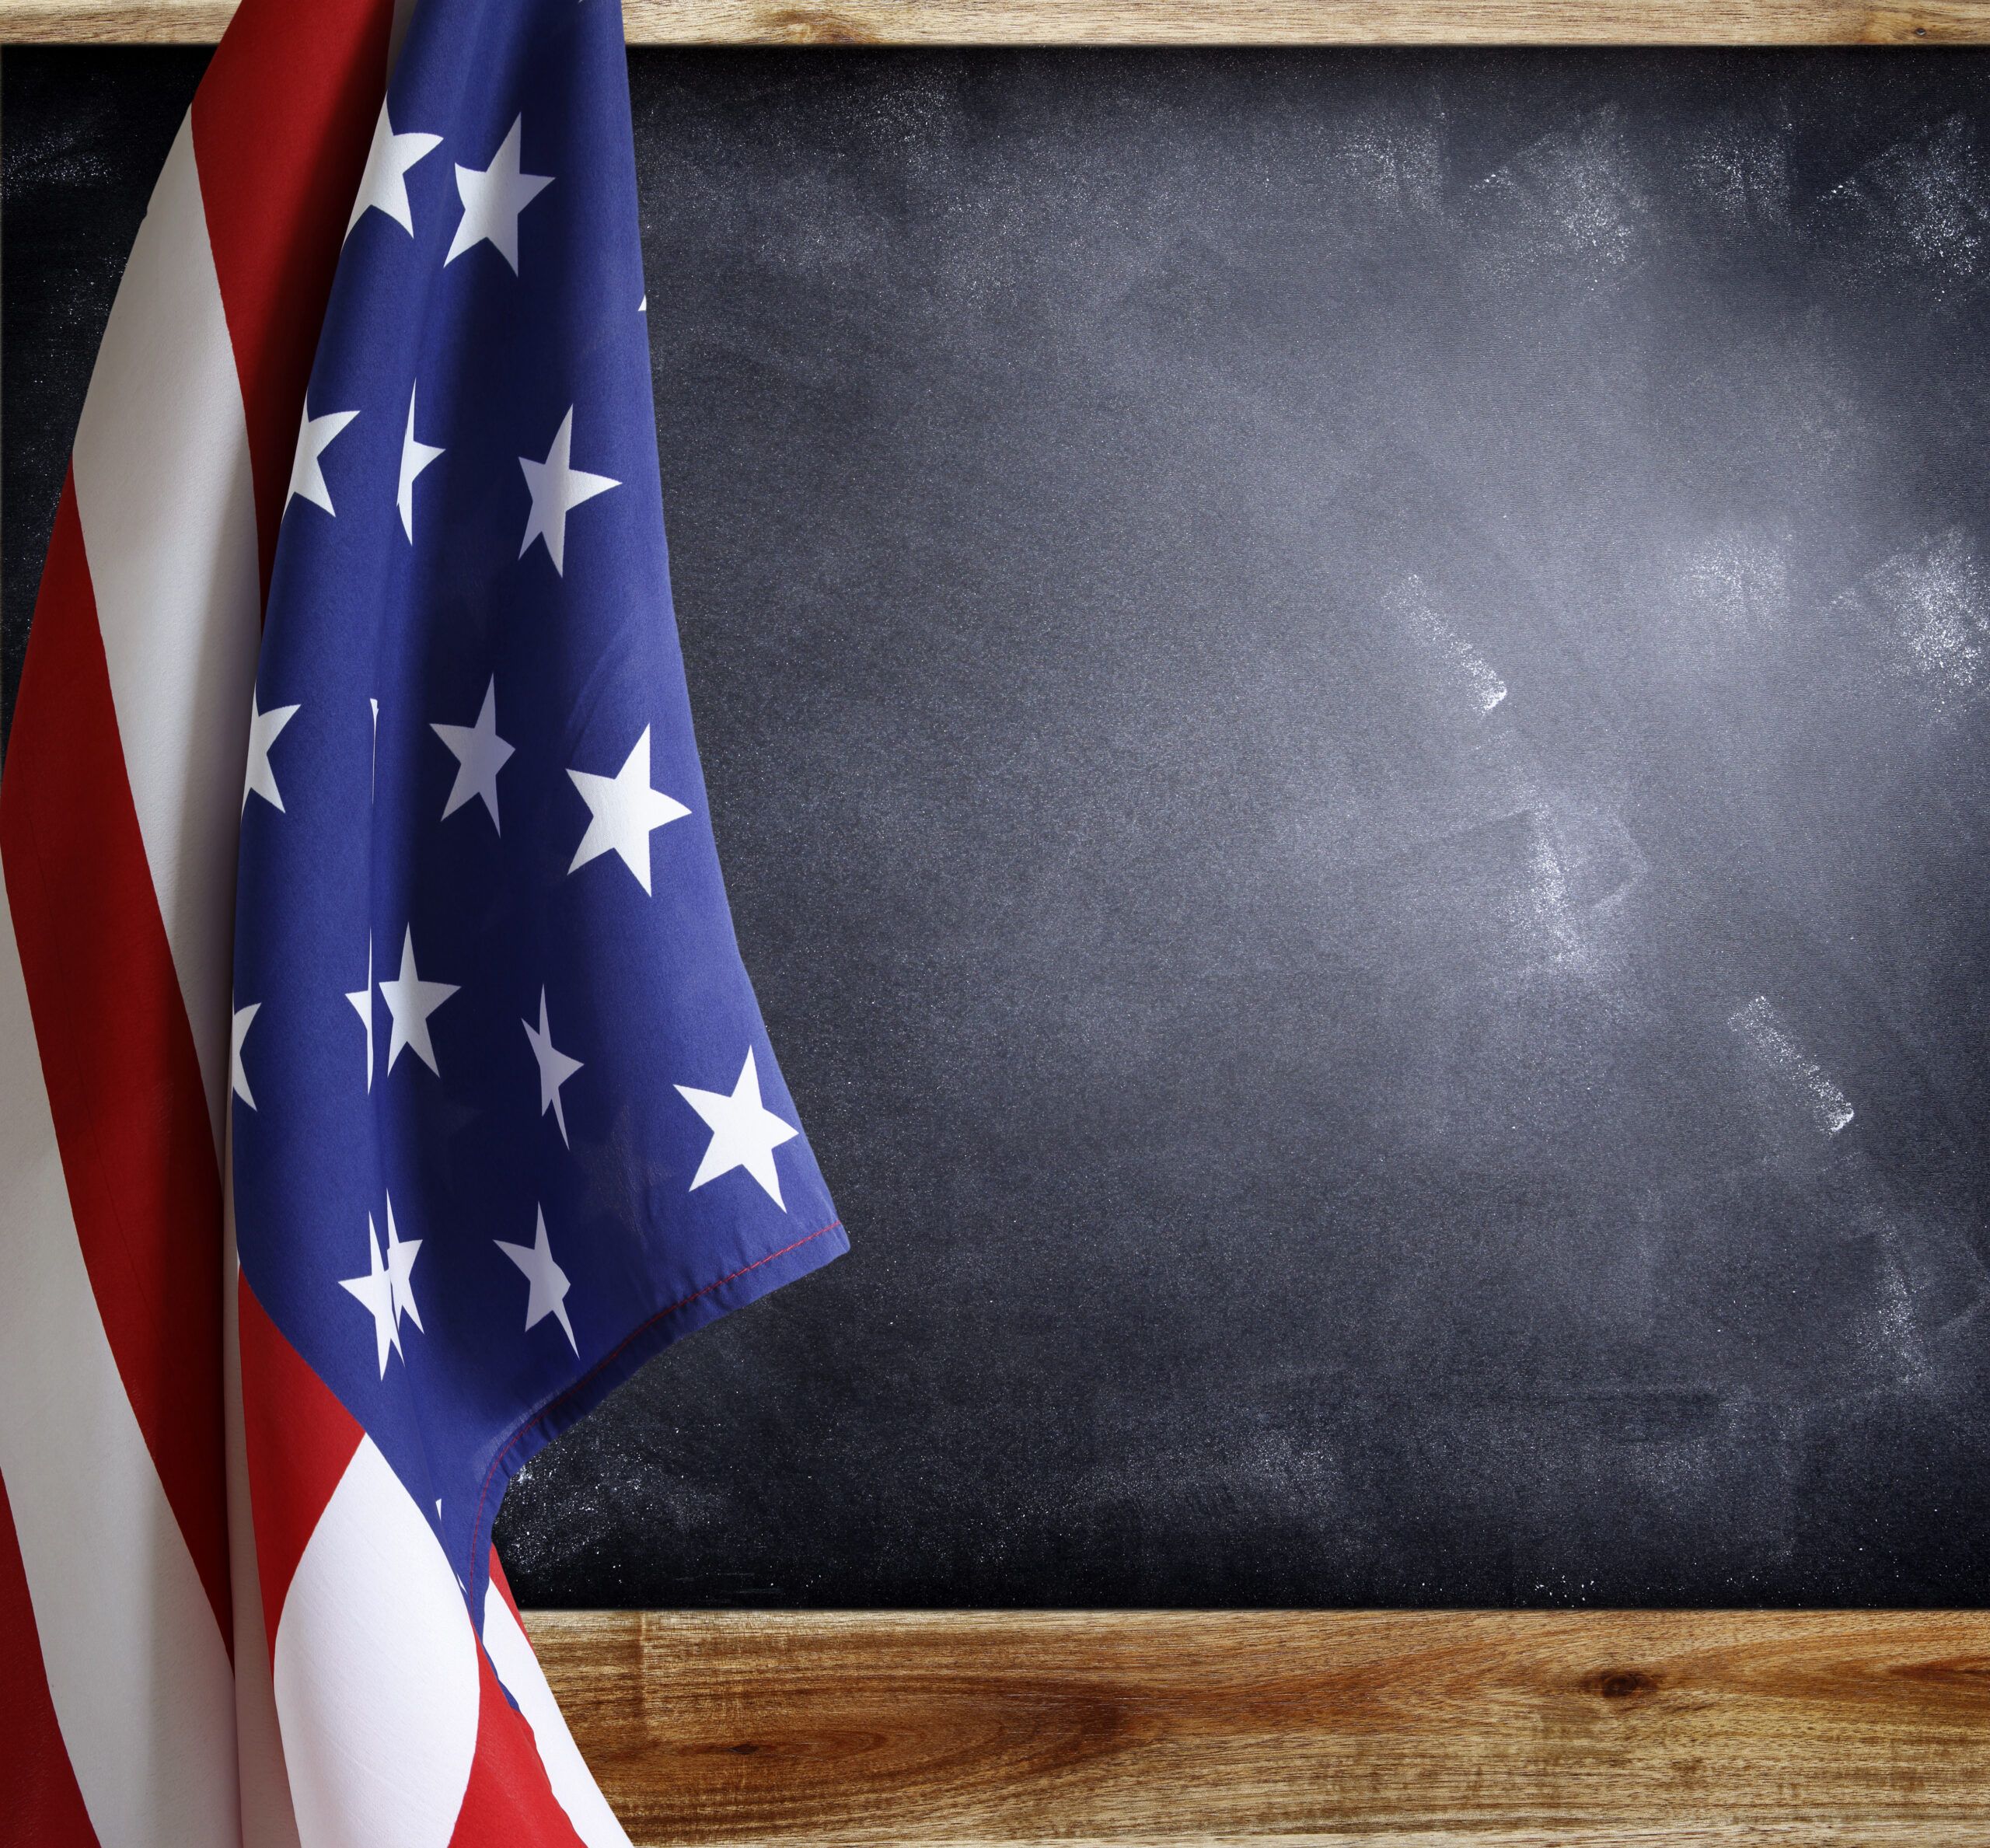 American flag hanging from a school room chalkboard